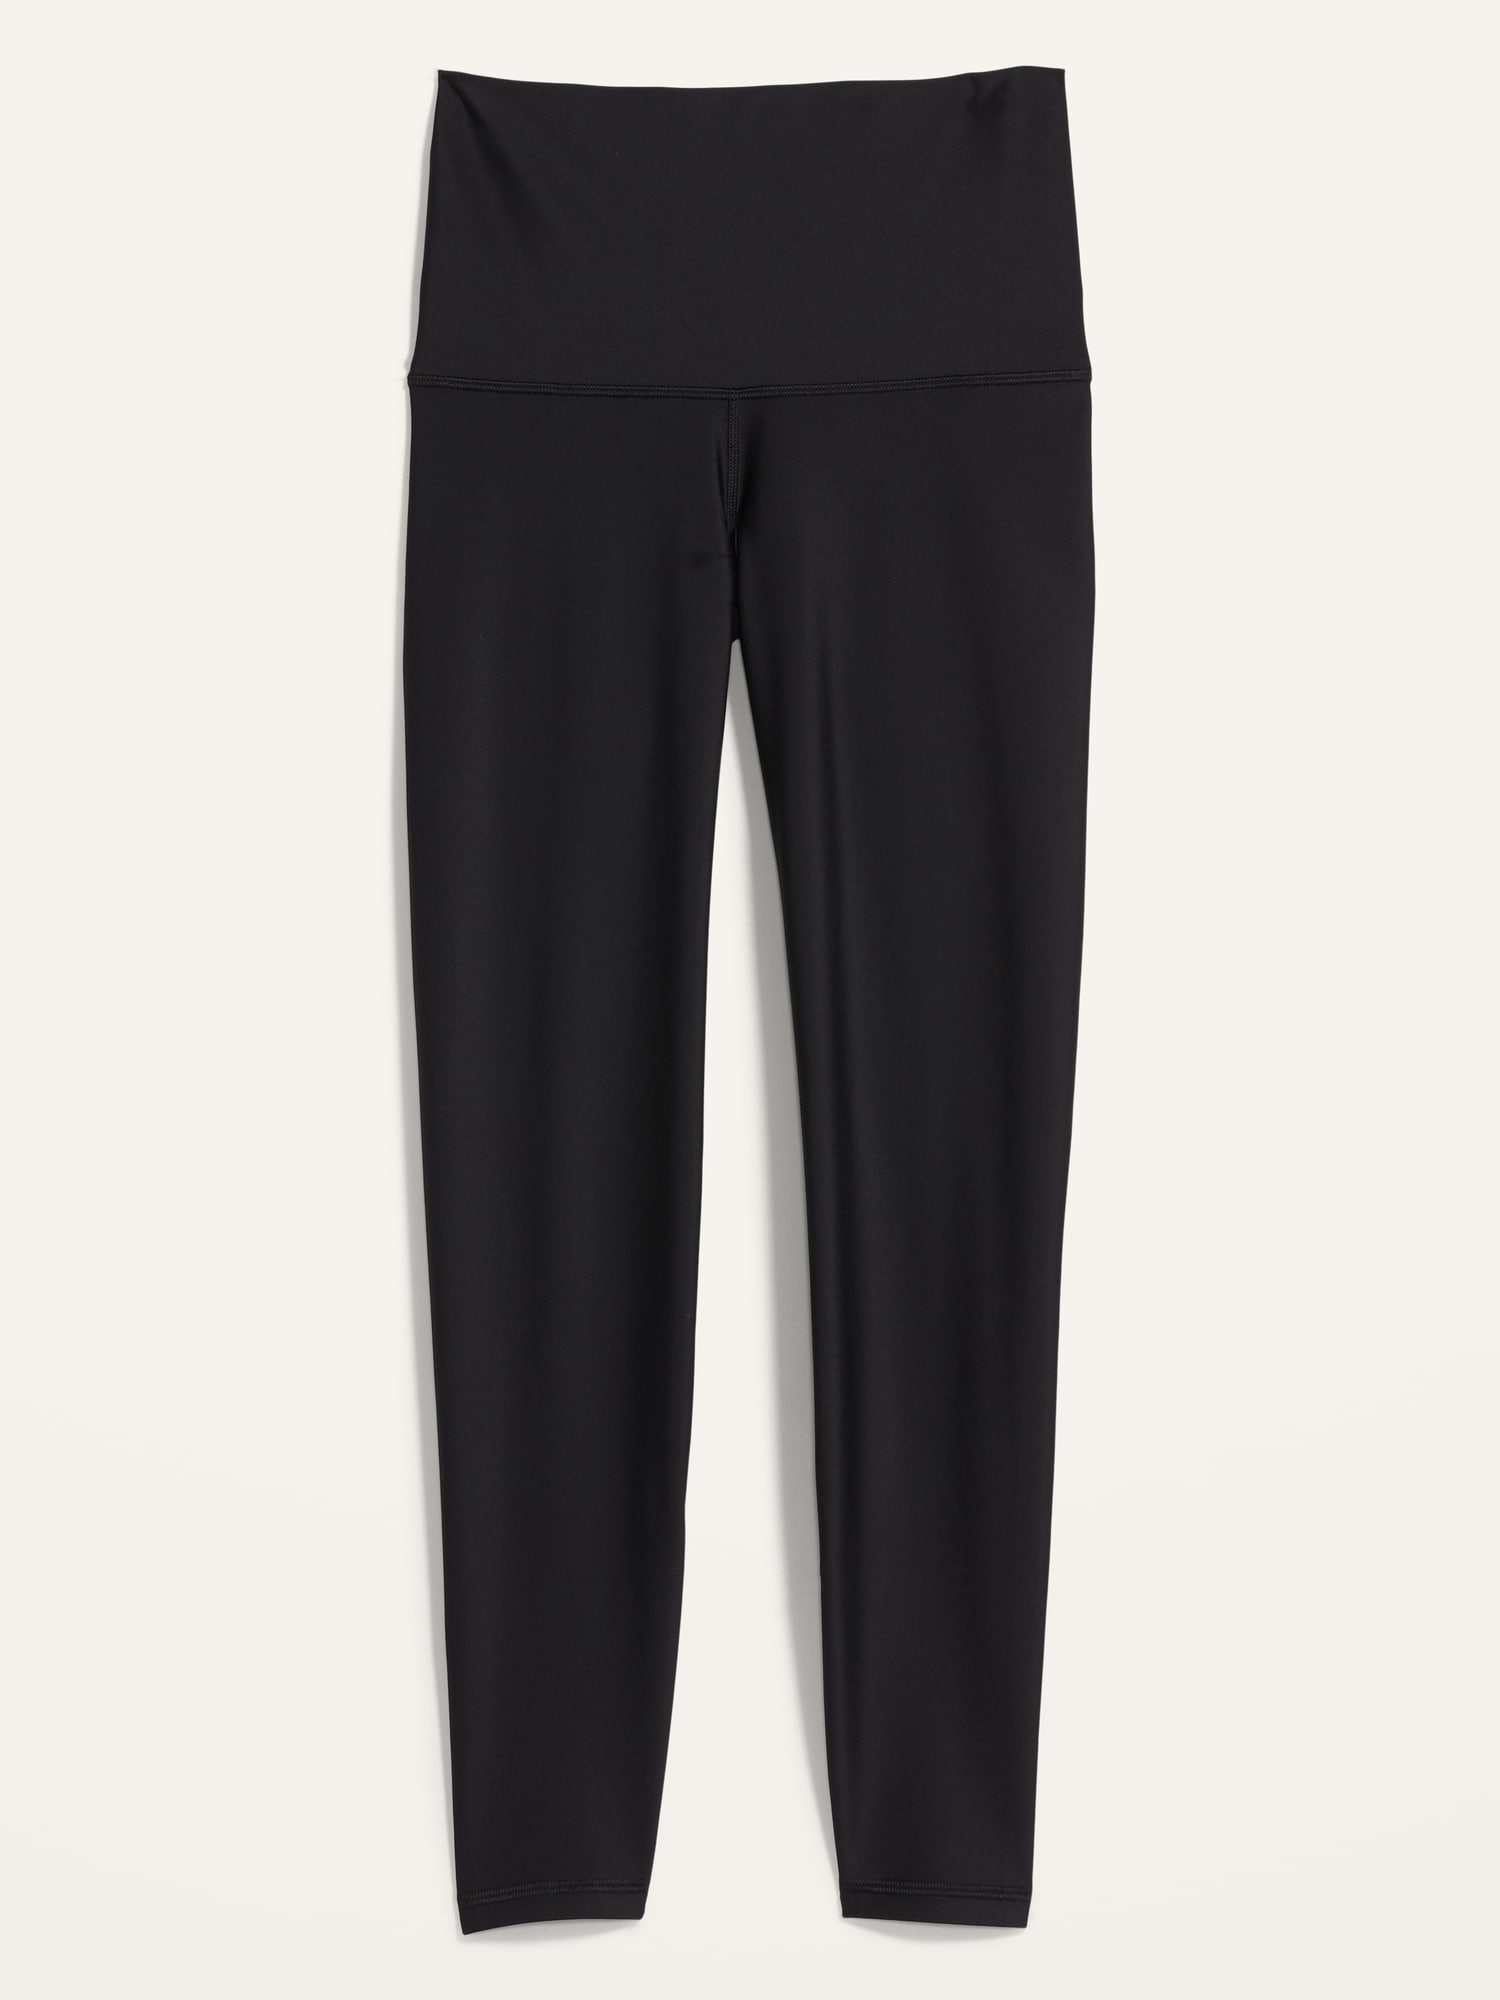 Extra High-Waisted PowerSoft 7/8 Leggings for Women | Old Navy